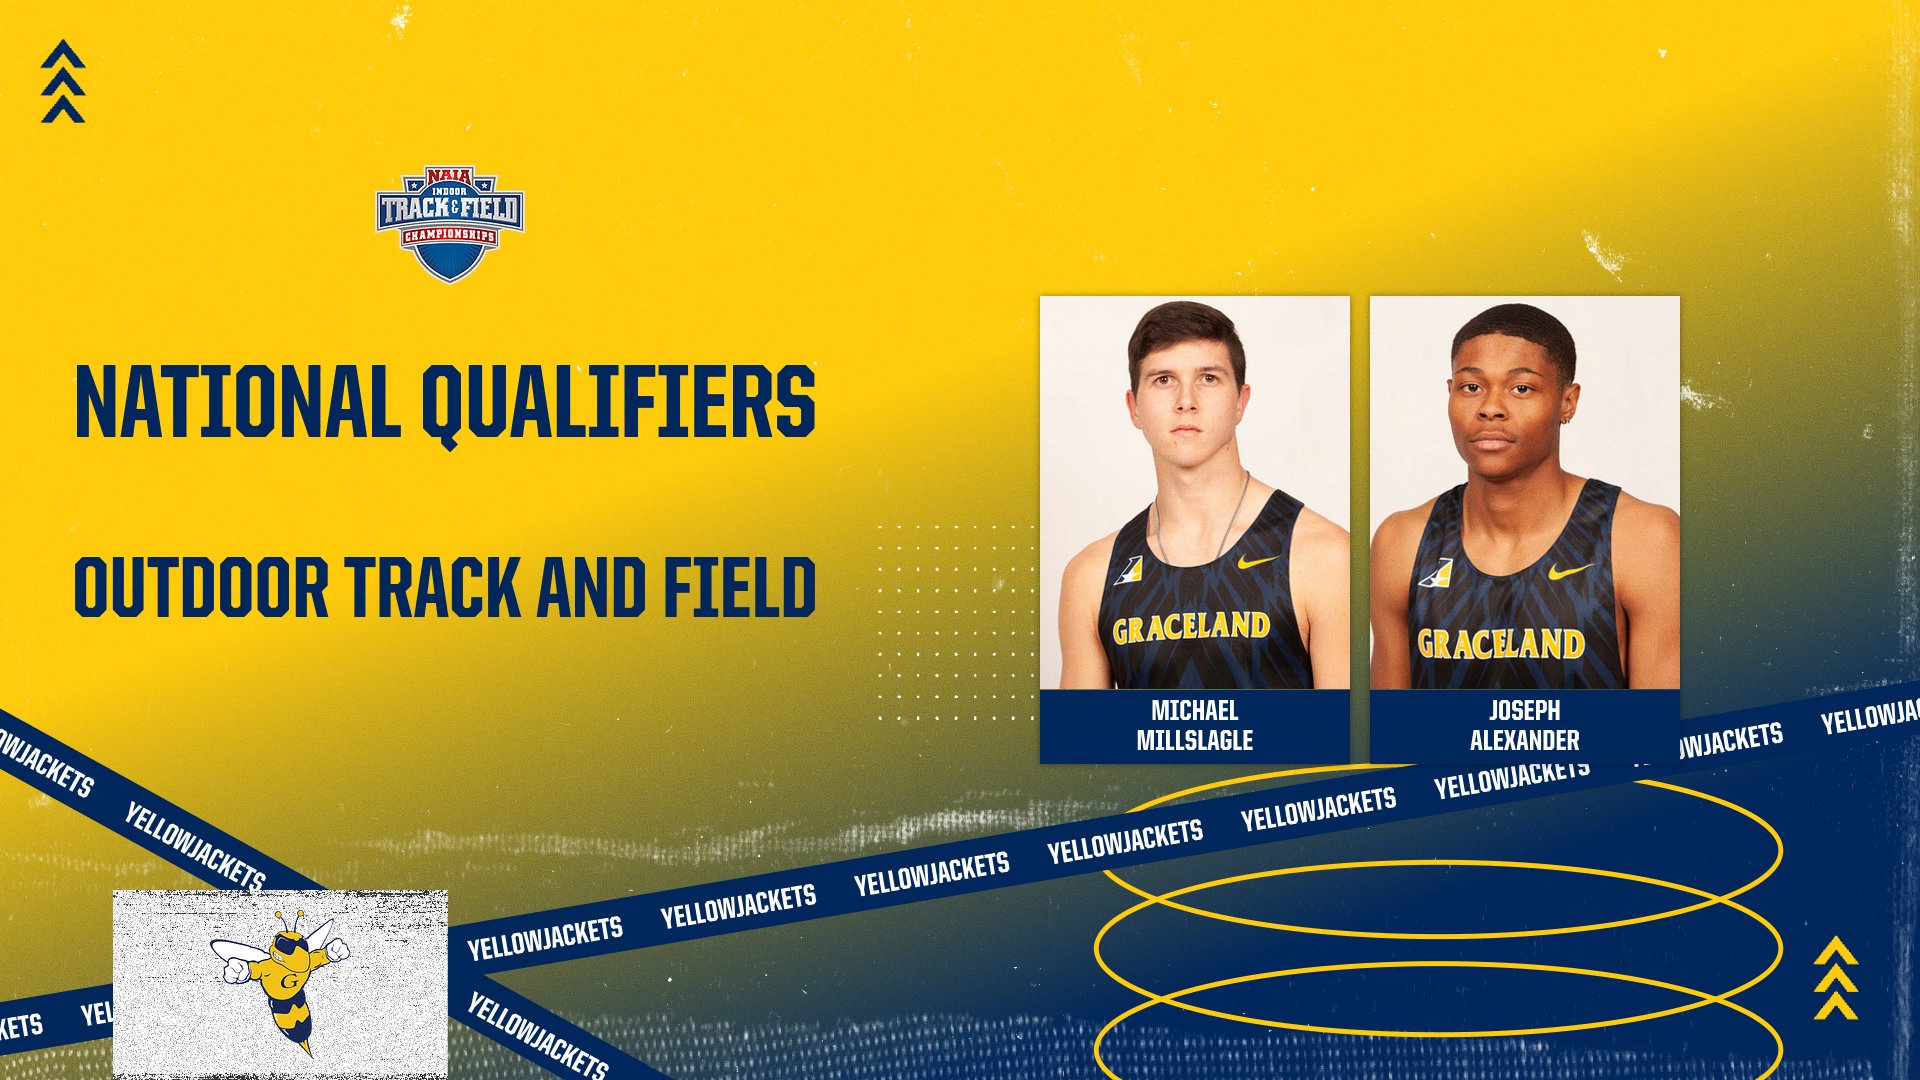 Men’s Outdoor Track and Field National Qualifiers Announced; The Yellowjackets Send Millslagle and Alexander